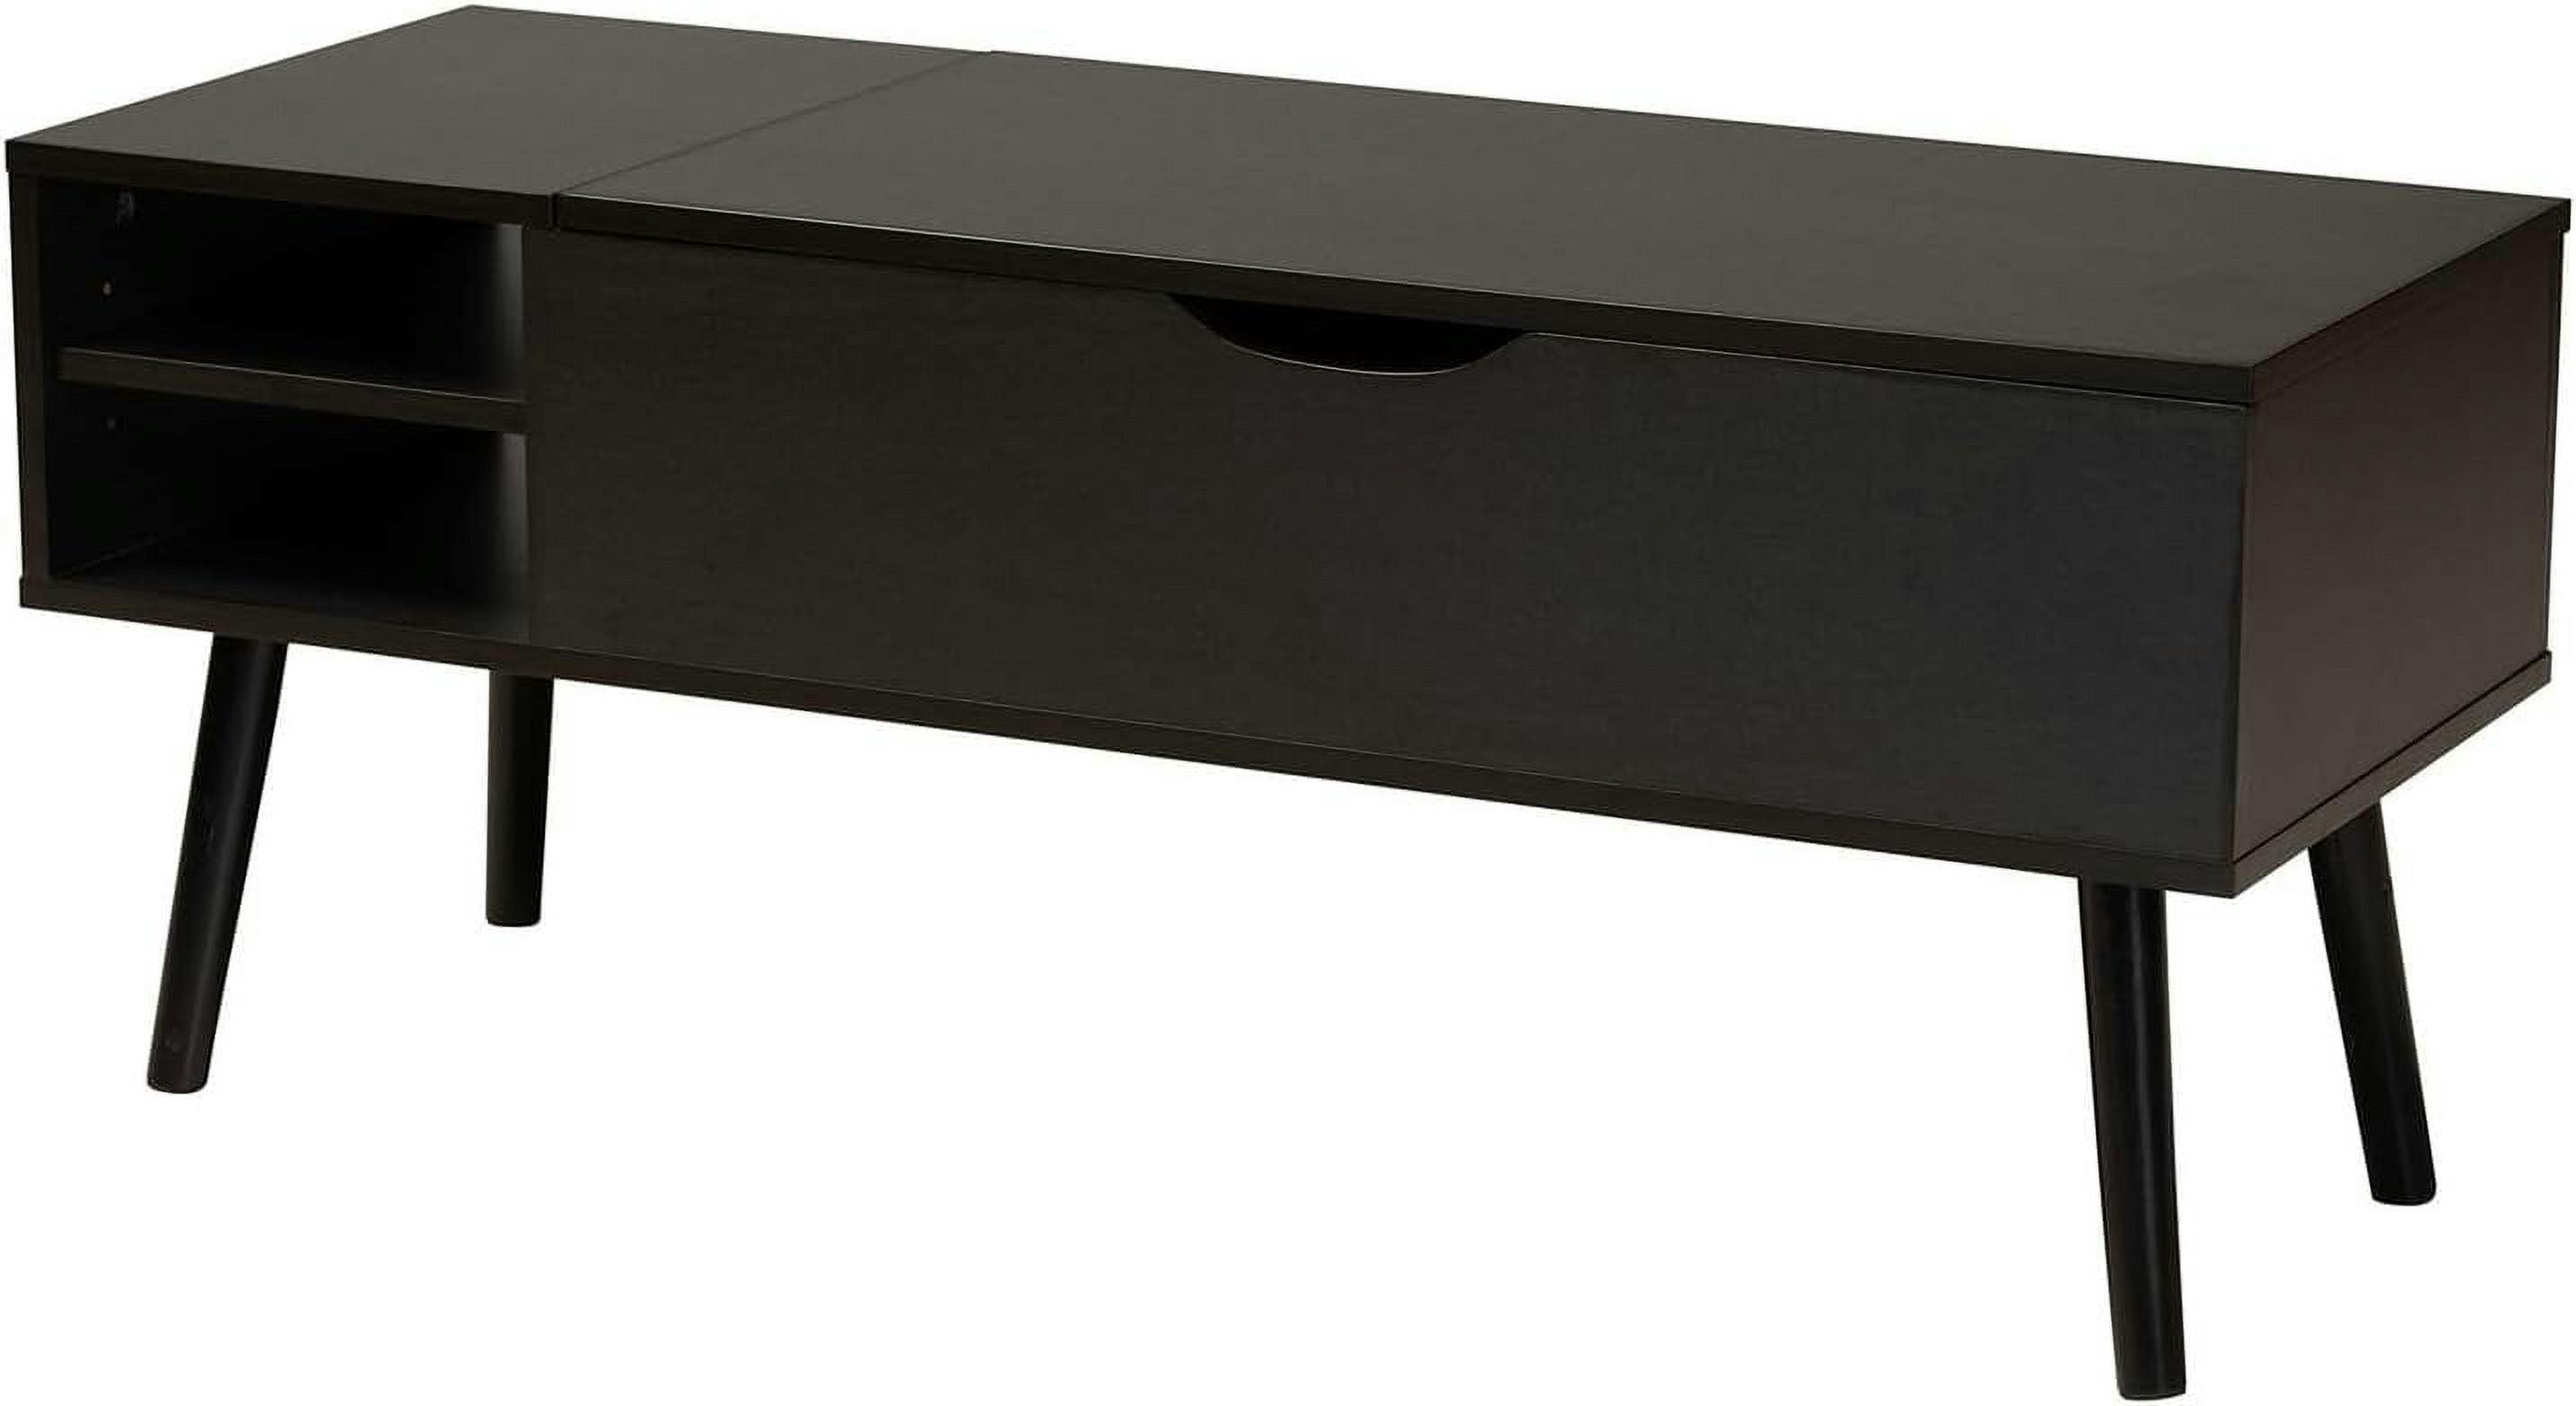 Roden Modern Two-Tone Black and Espresso Rectangular Wood Coffee Table with Lift-Top Storage